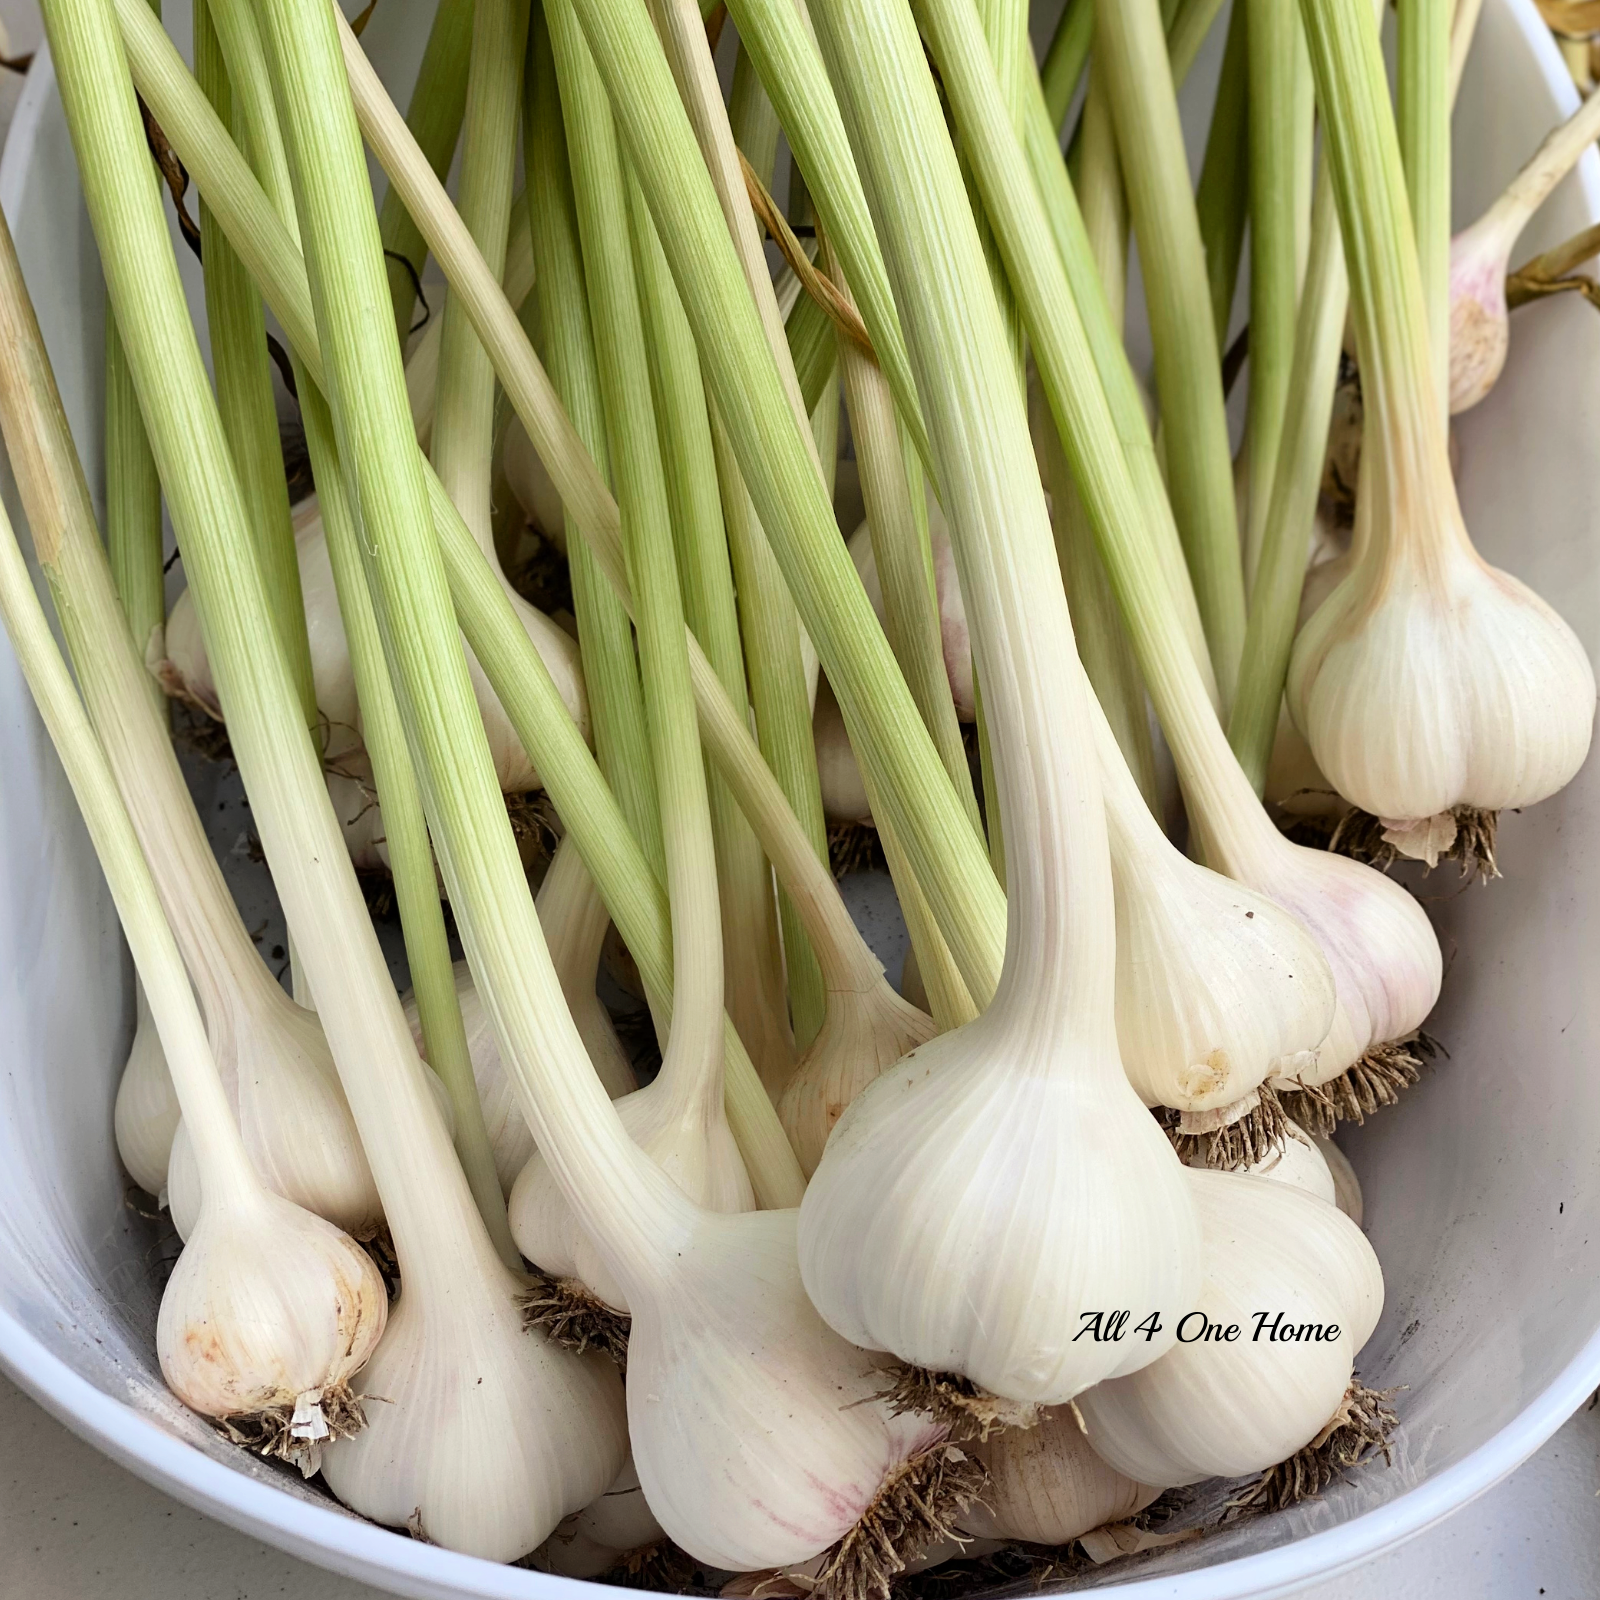 How to plant, harvest, and store garlic.